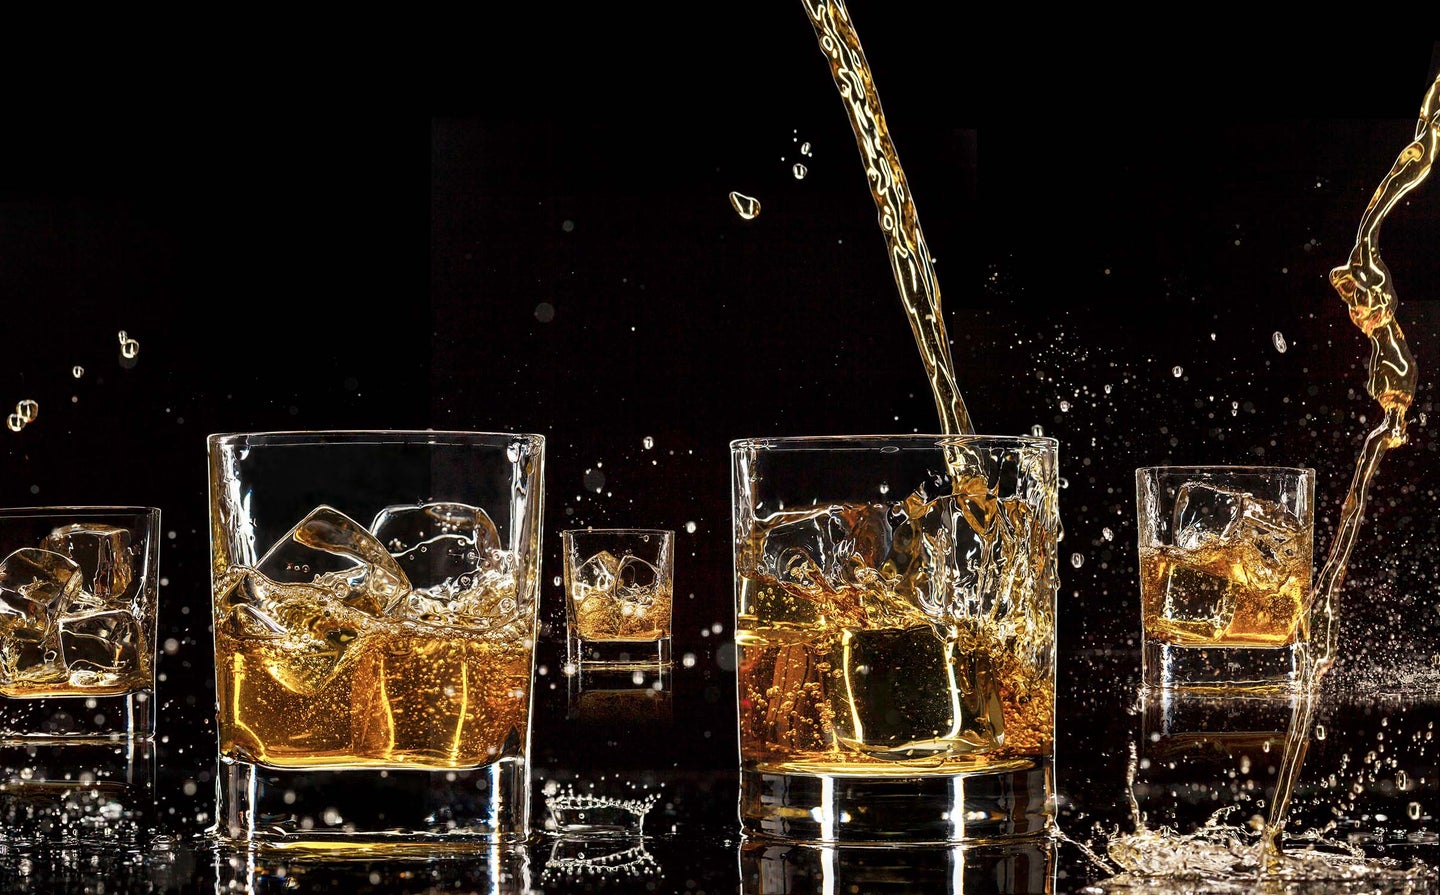 Bartenders often suggest whiskey drinkers should add a splash of water to their drink. Chemists uncover the reason why.